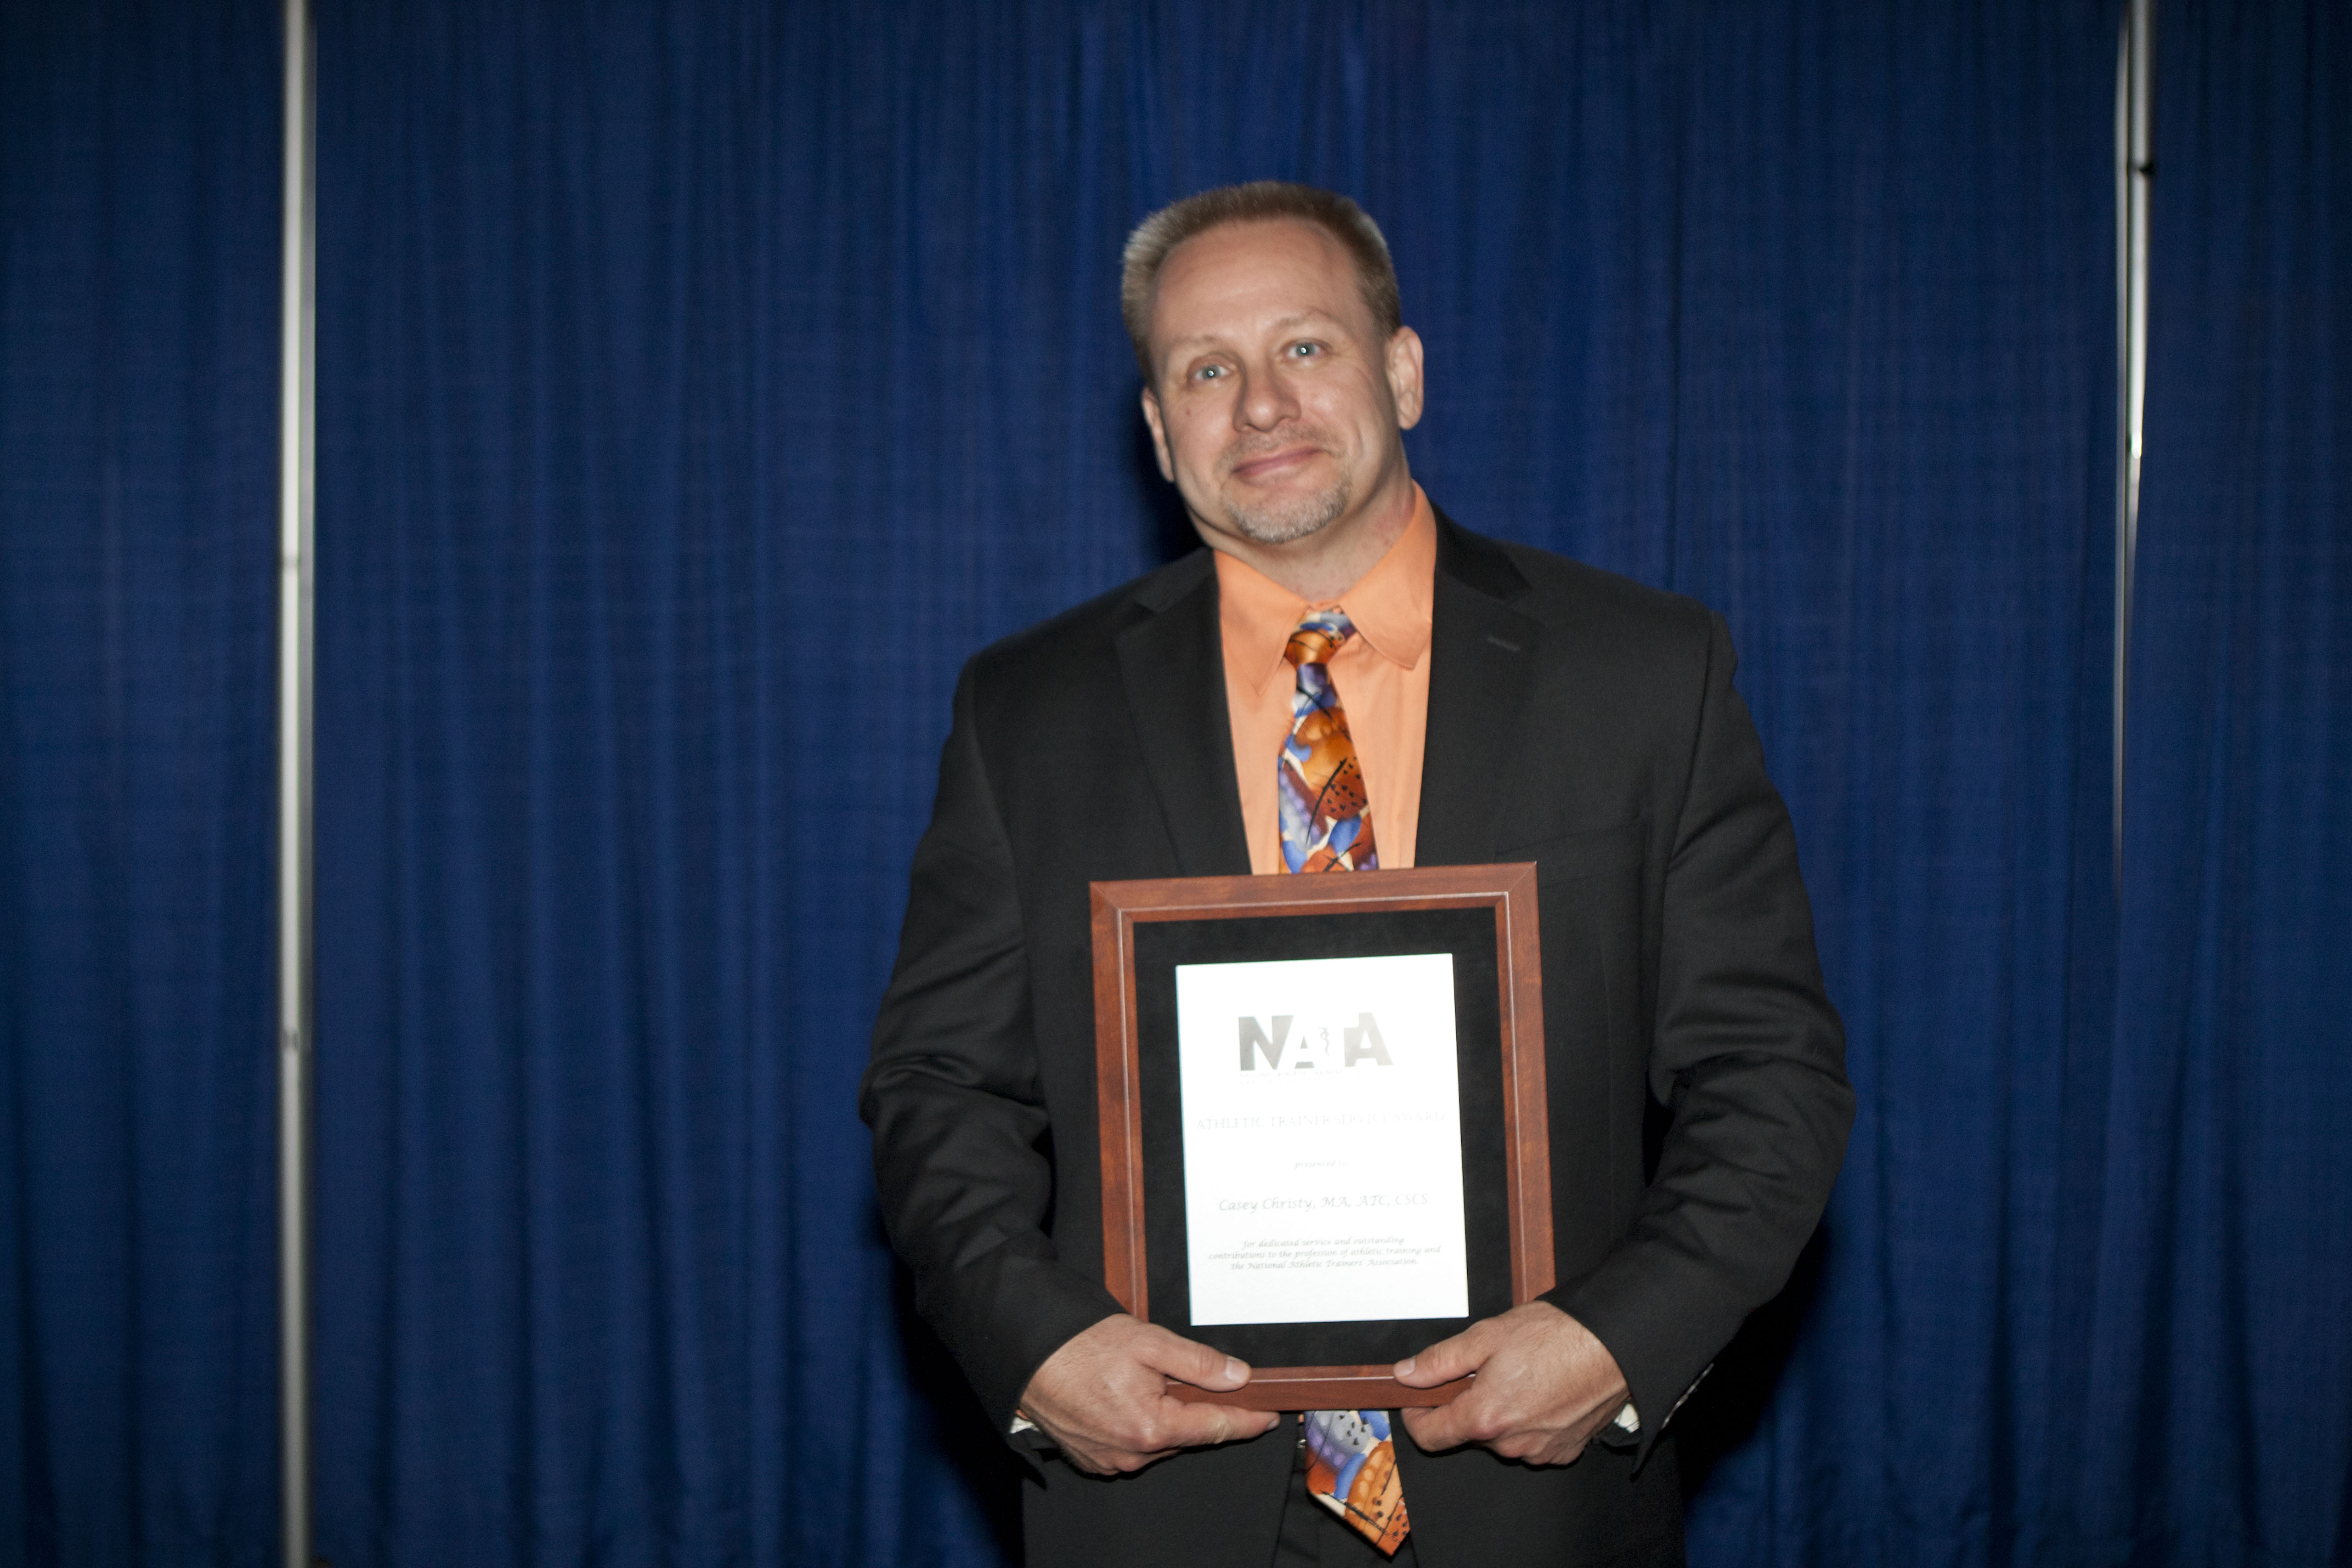 Casey Christy recognized for his professional service